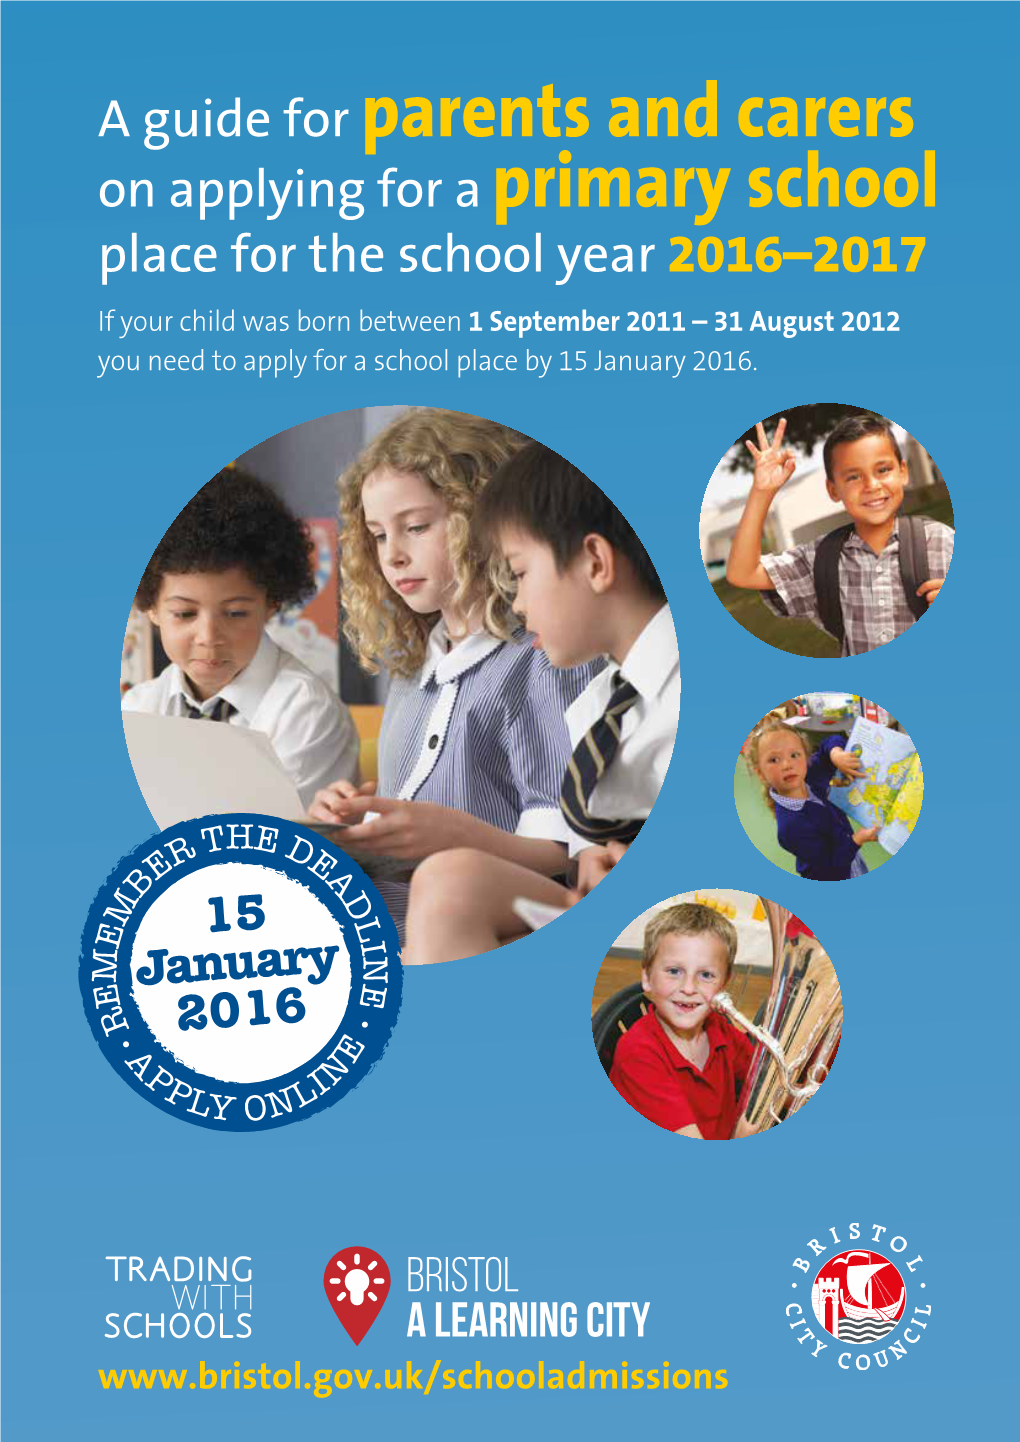 A Guide for Parents and Carers on Applying for a Primary School Place